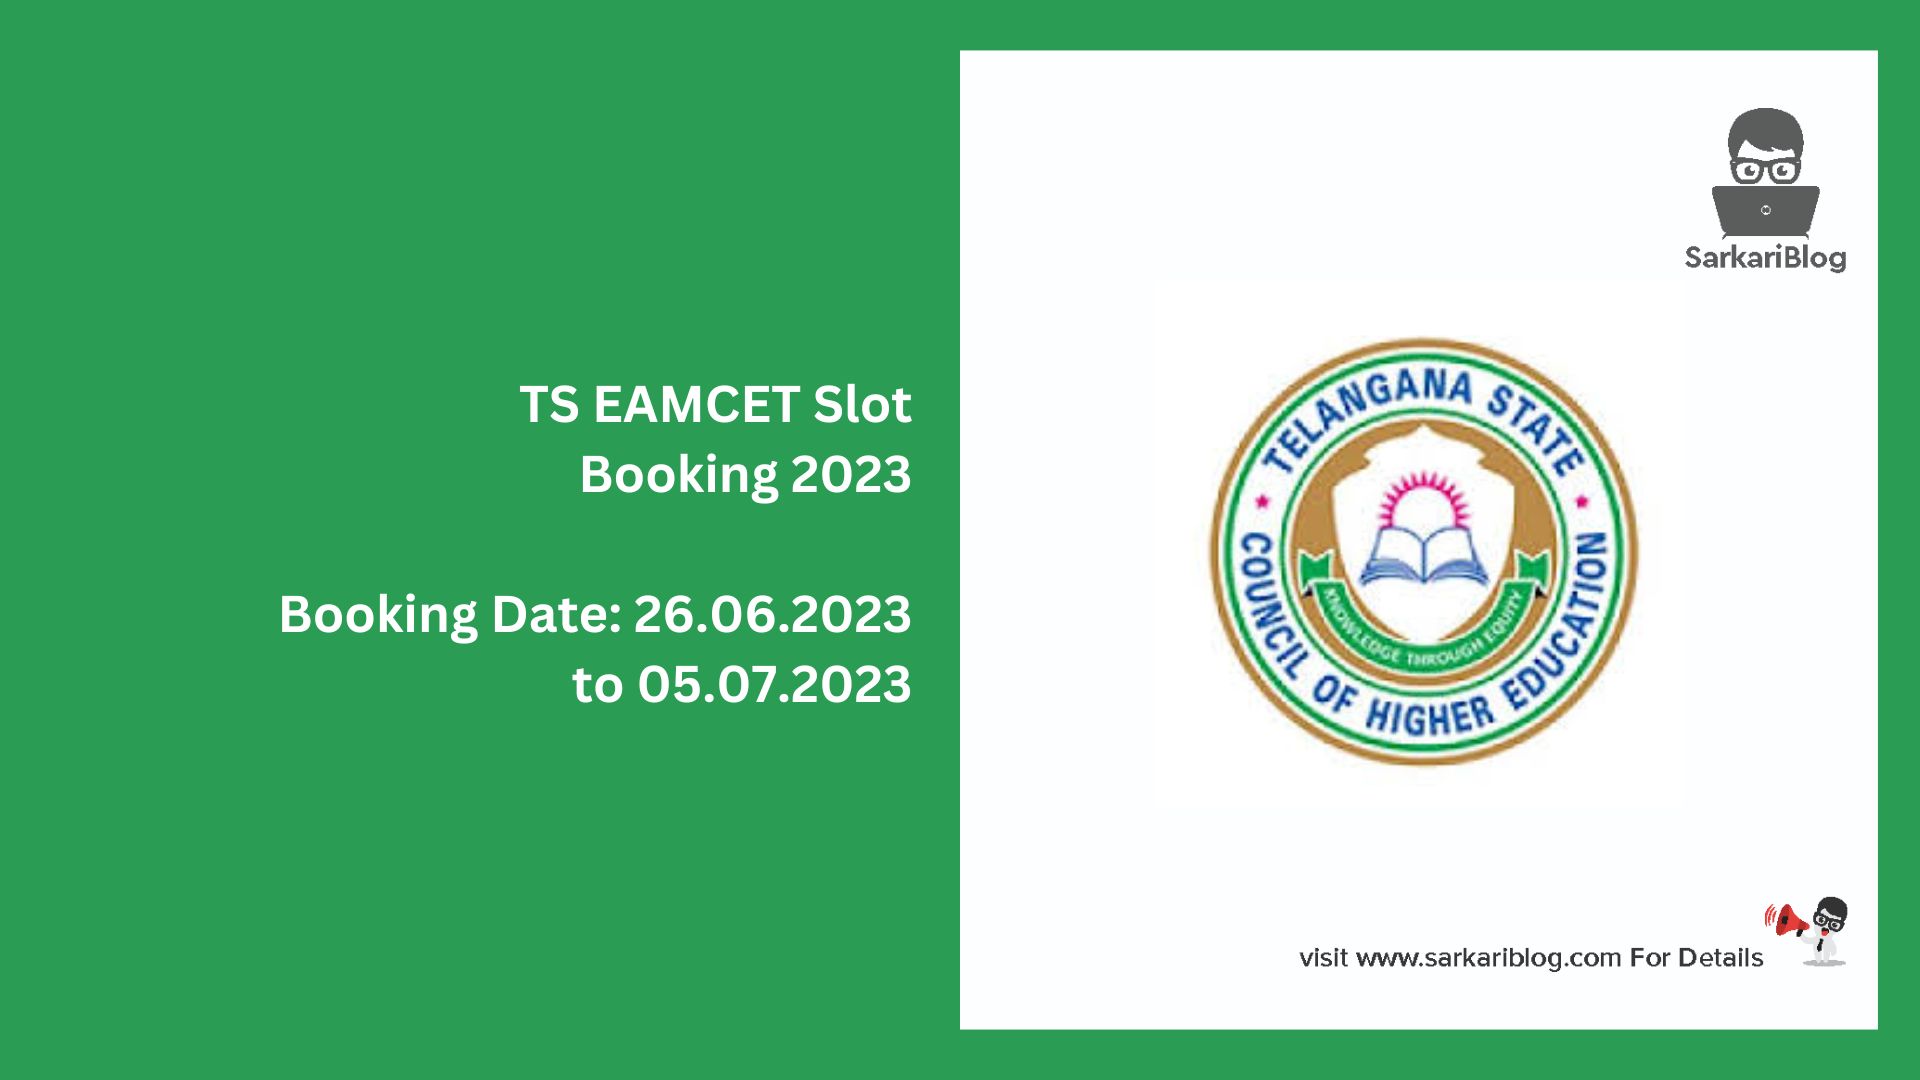 TS EAMCET Slot Booking 2023